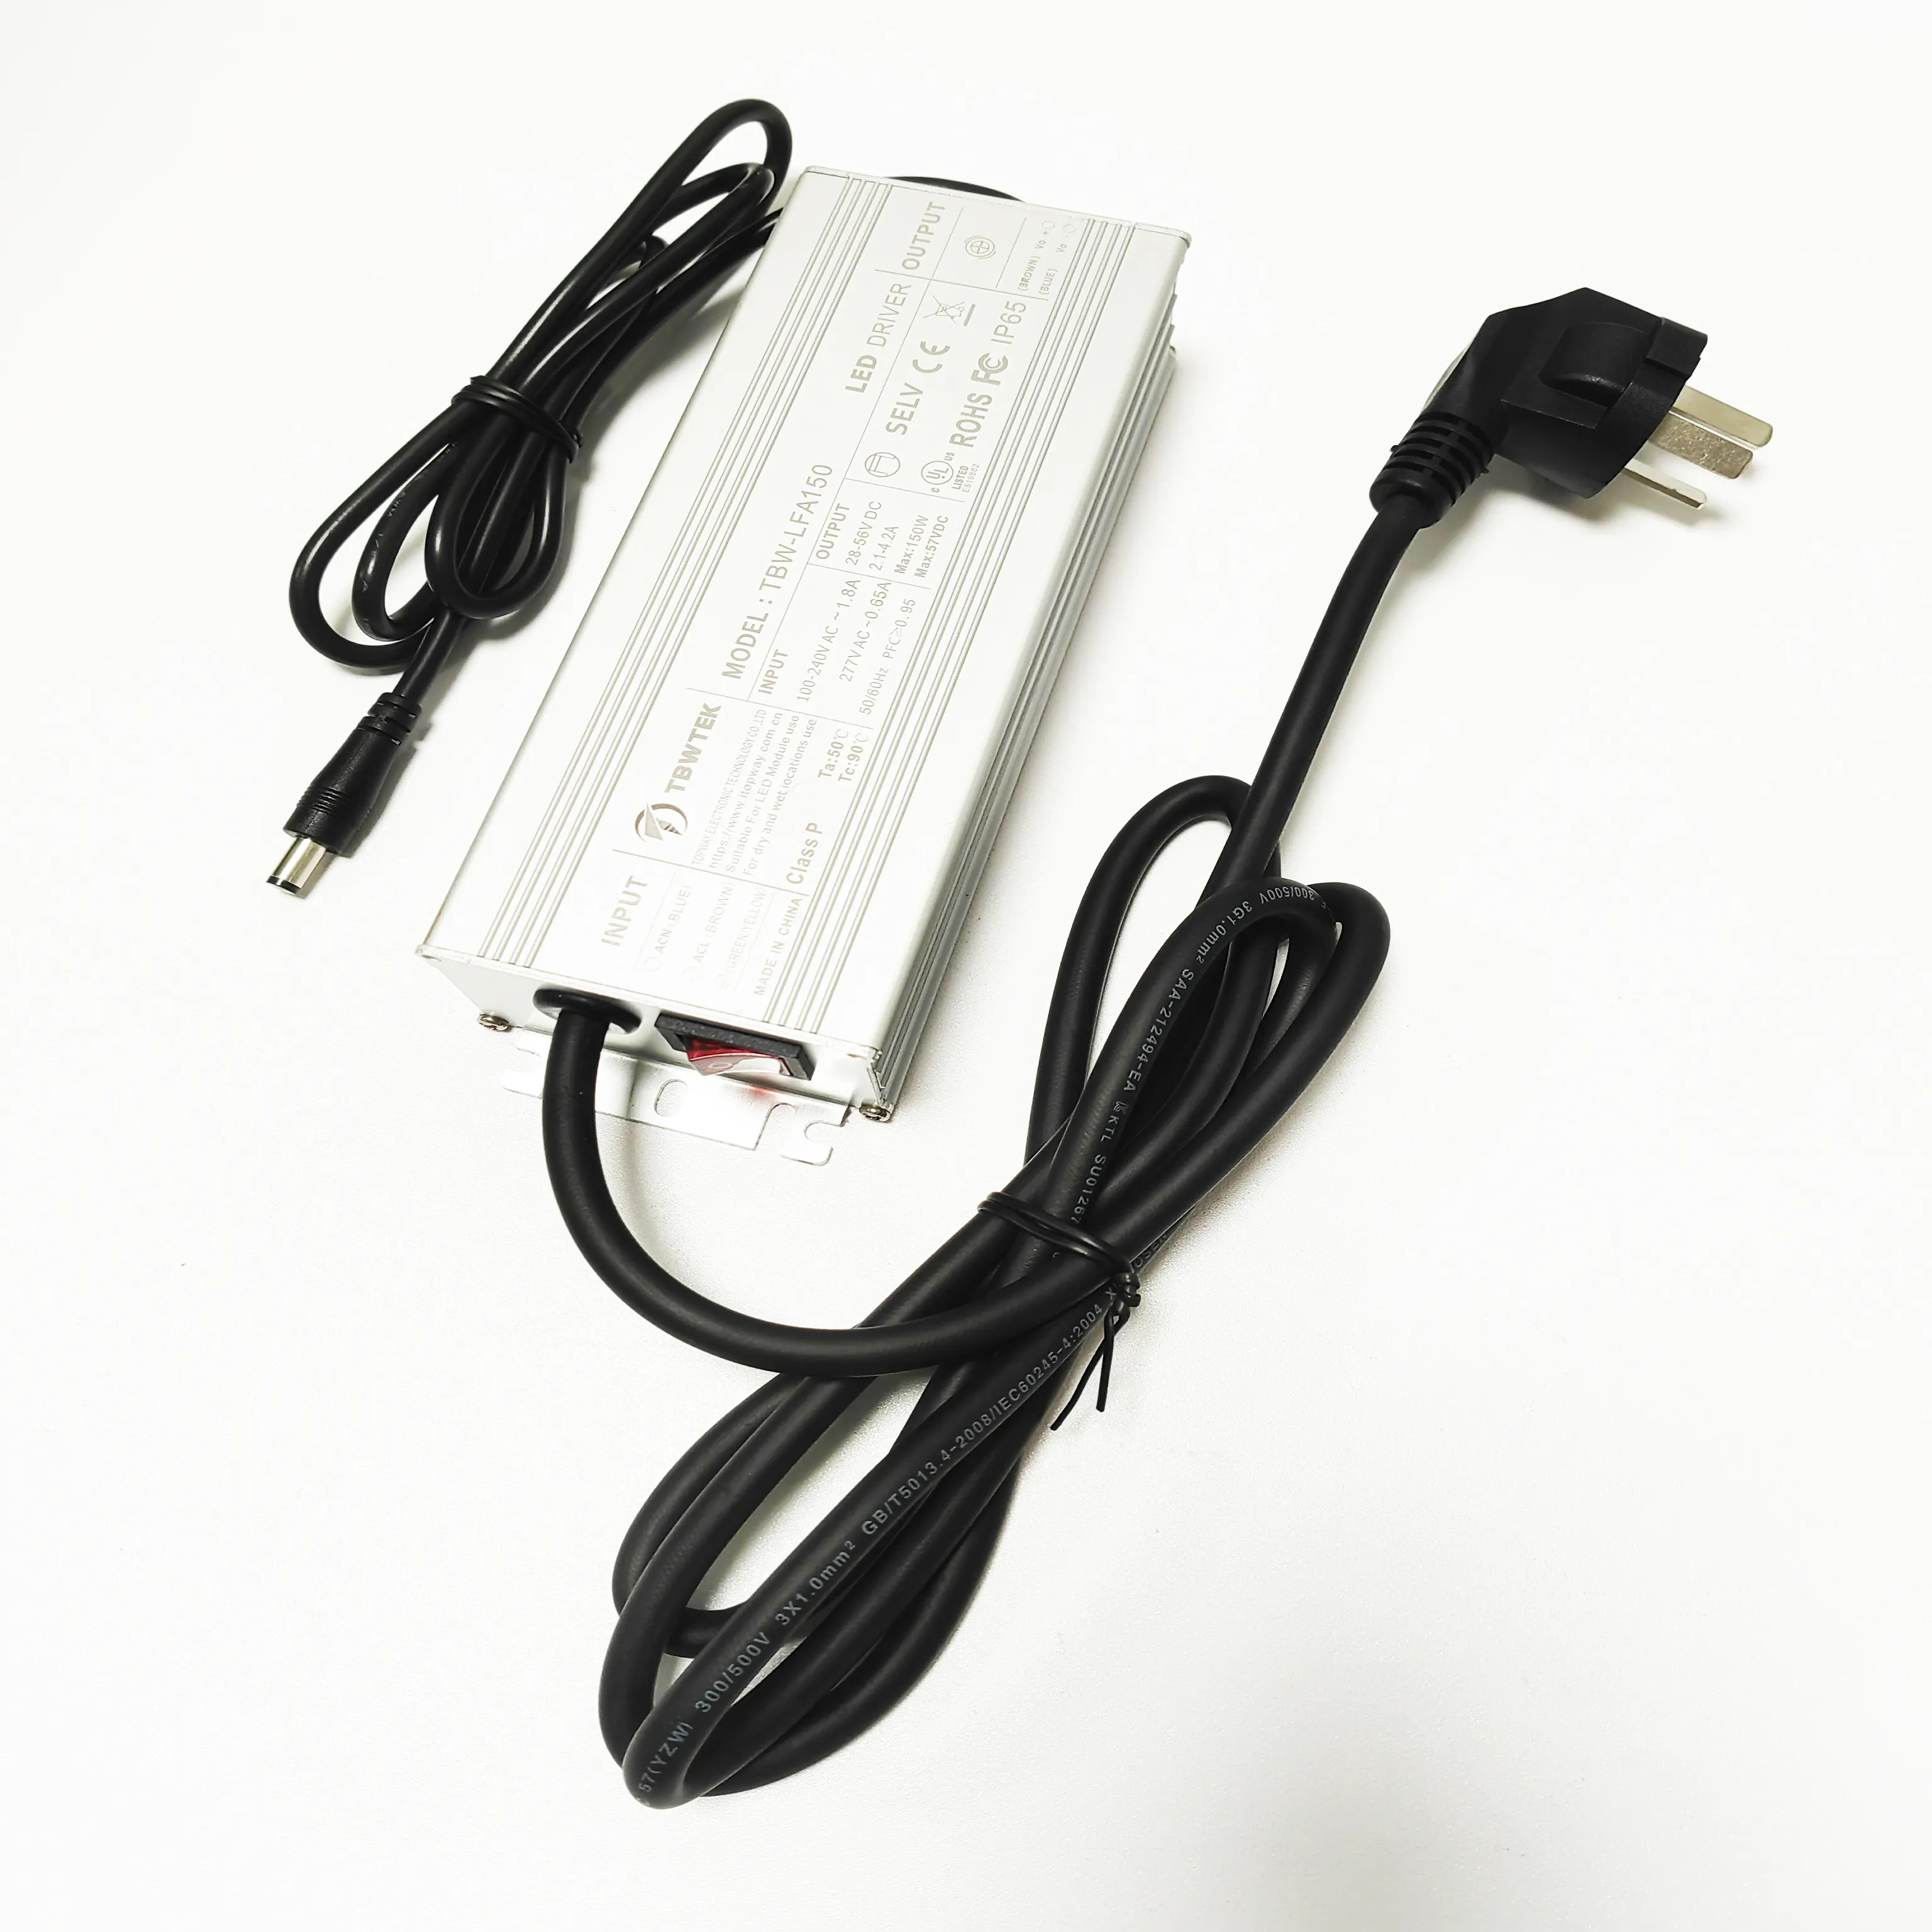 50W Constant Current DC28-52V 1500mA High Power led Power Supply Transformer Led Driver for high Bay Light Grow Light